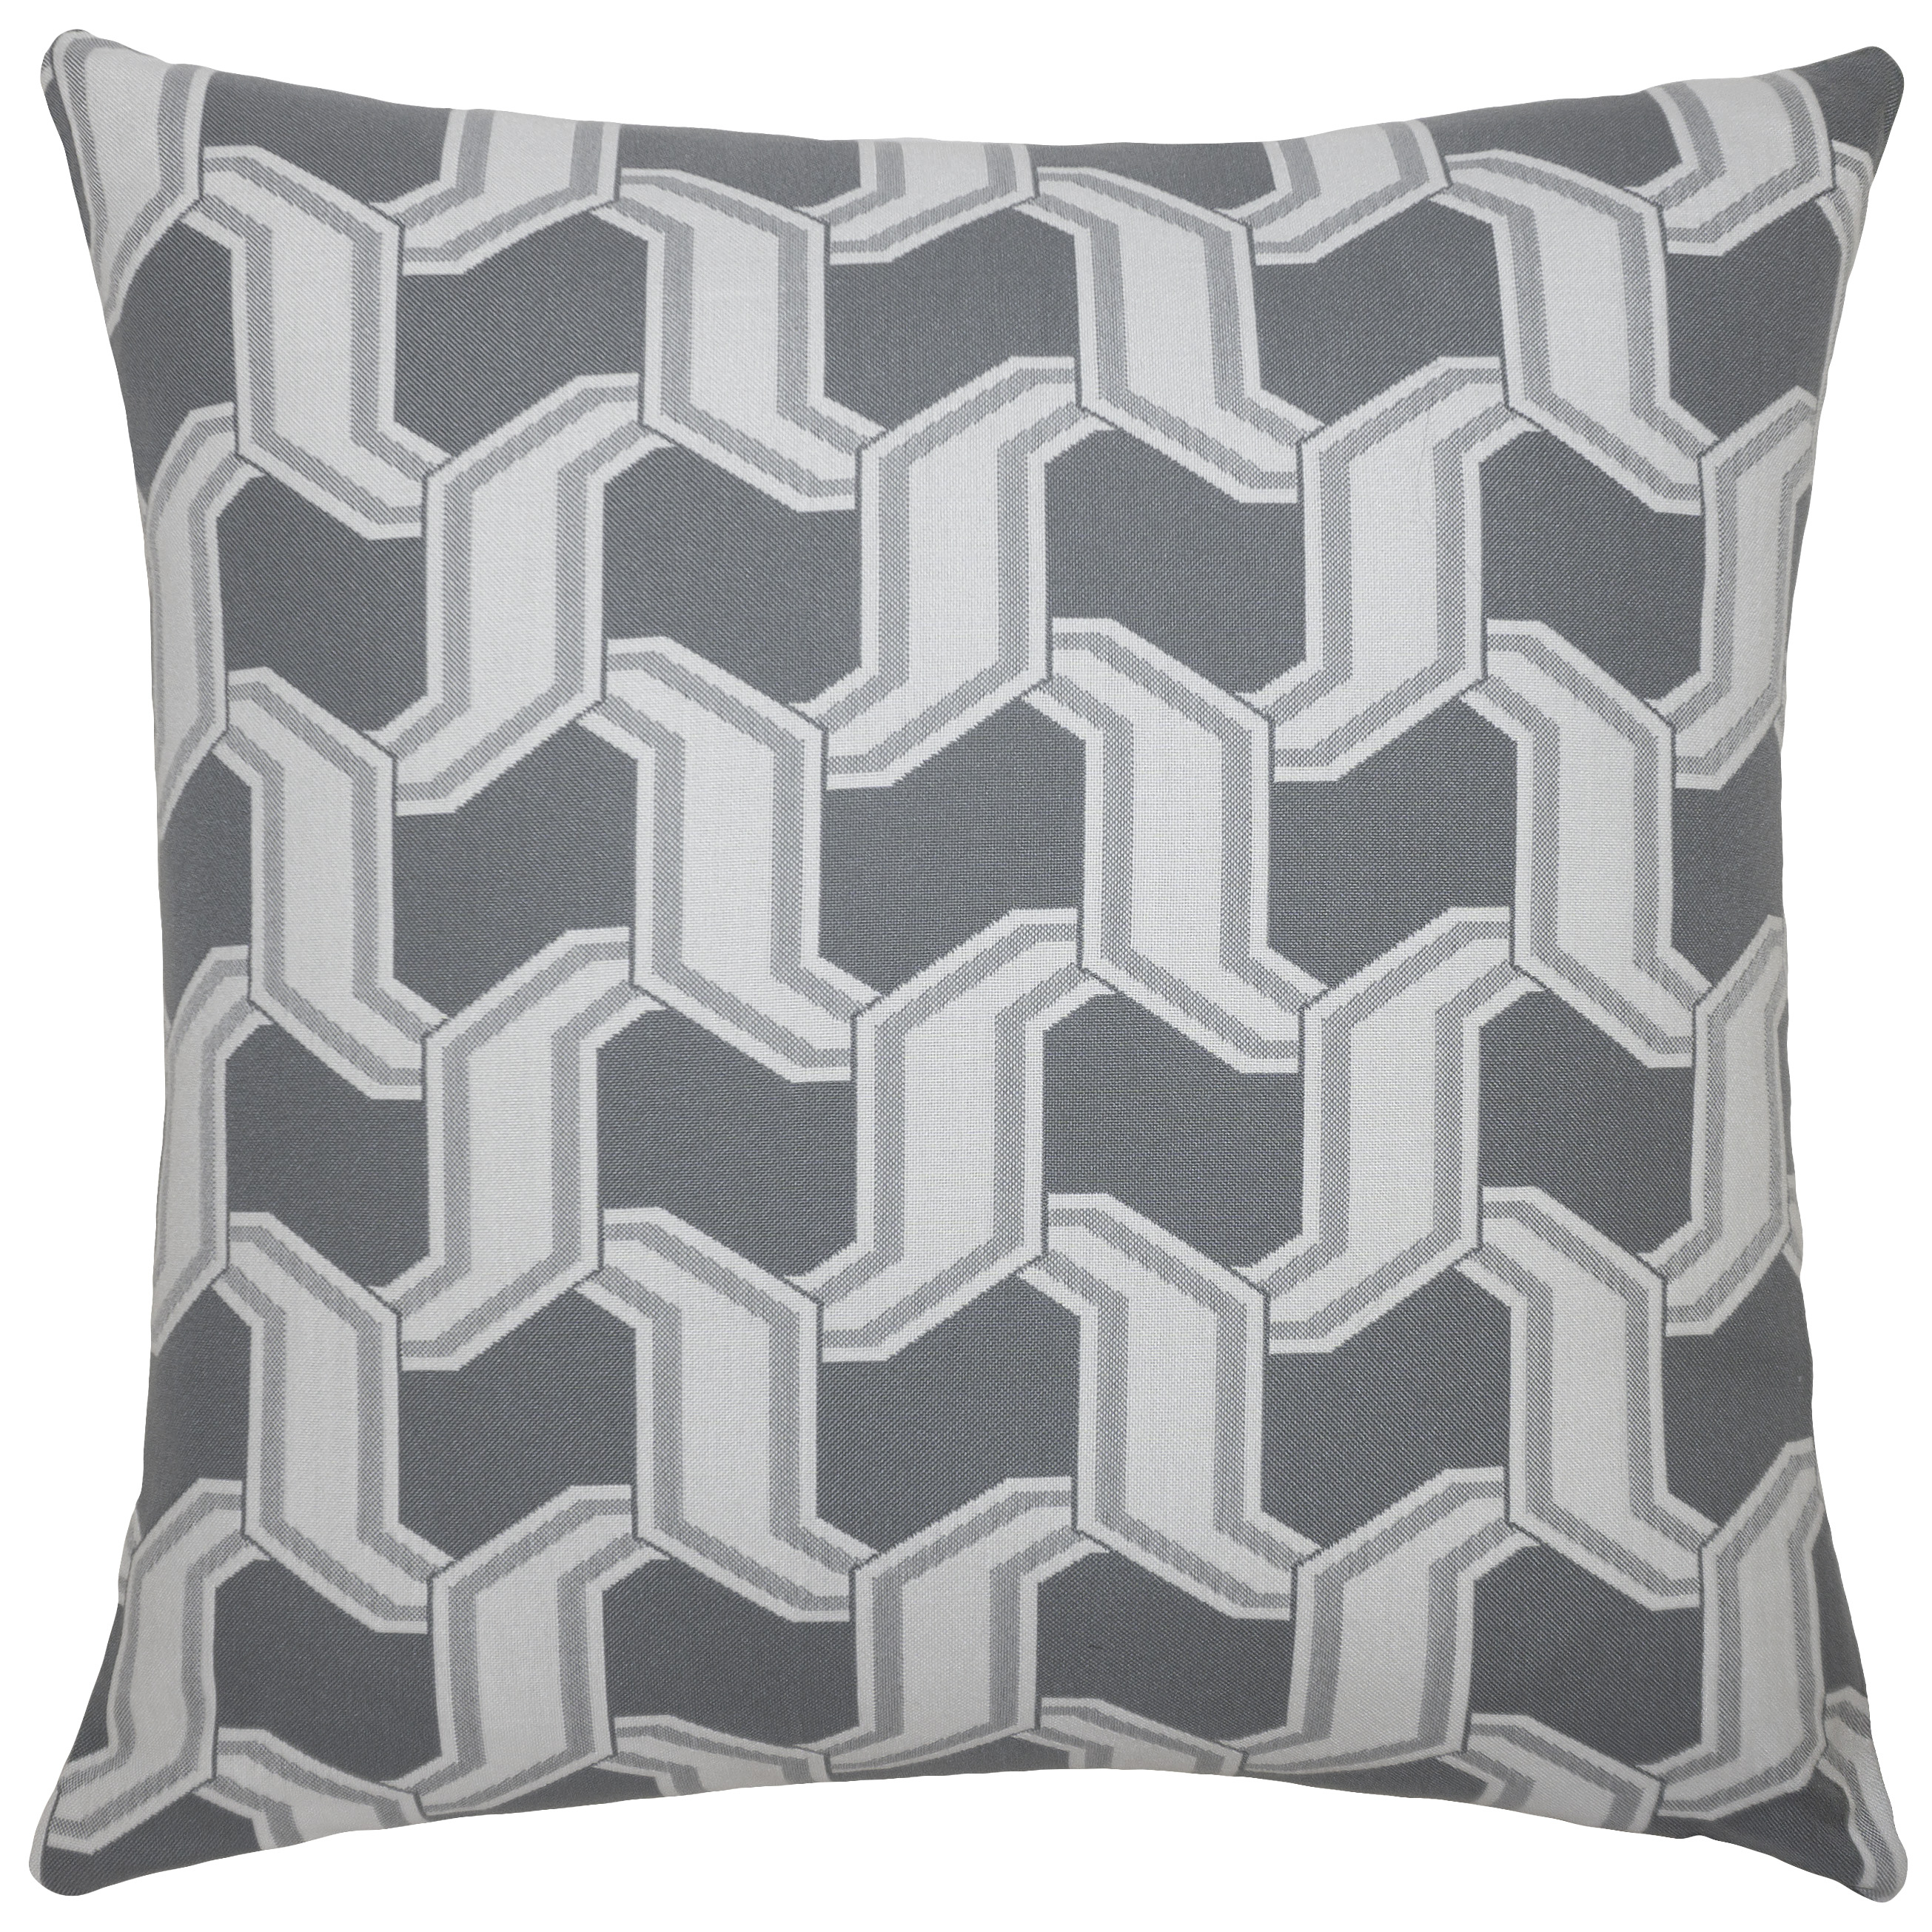 Chain Gray Outdoor Pillow